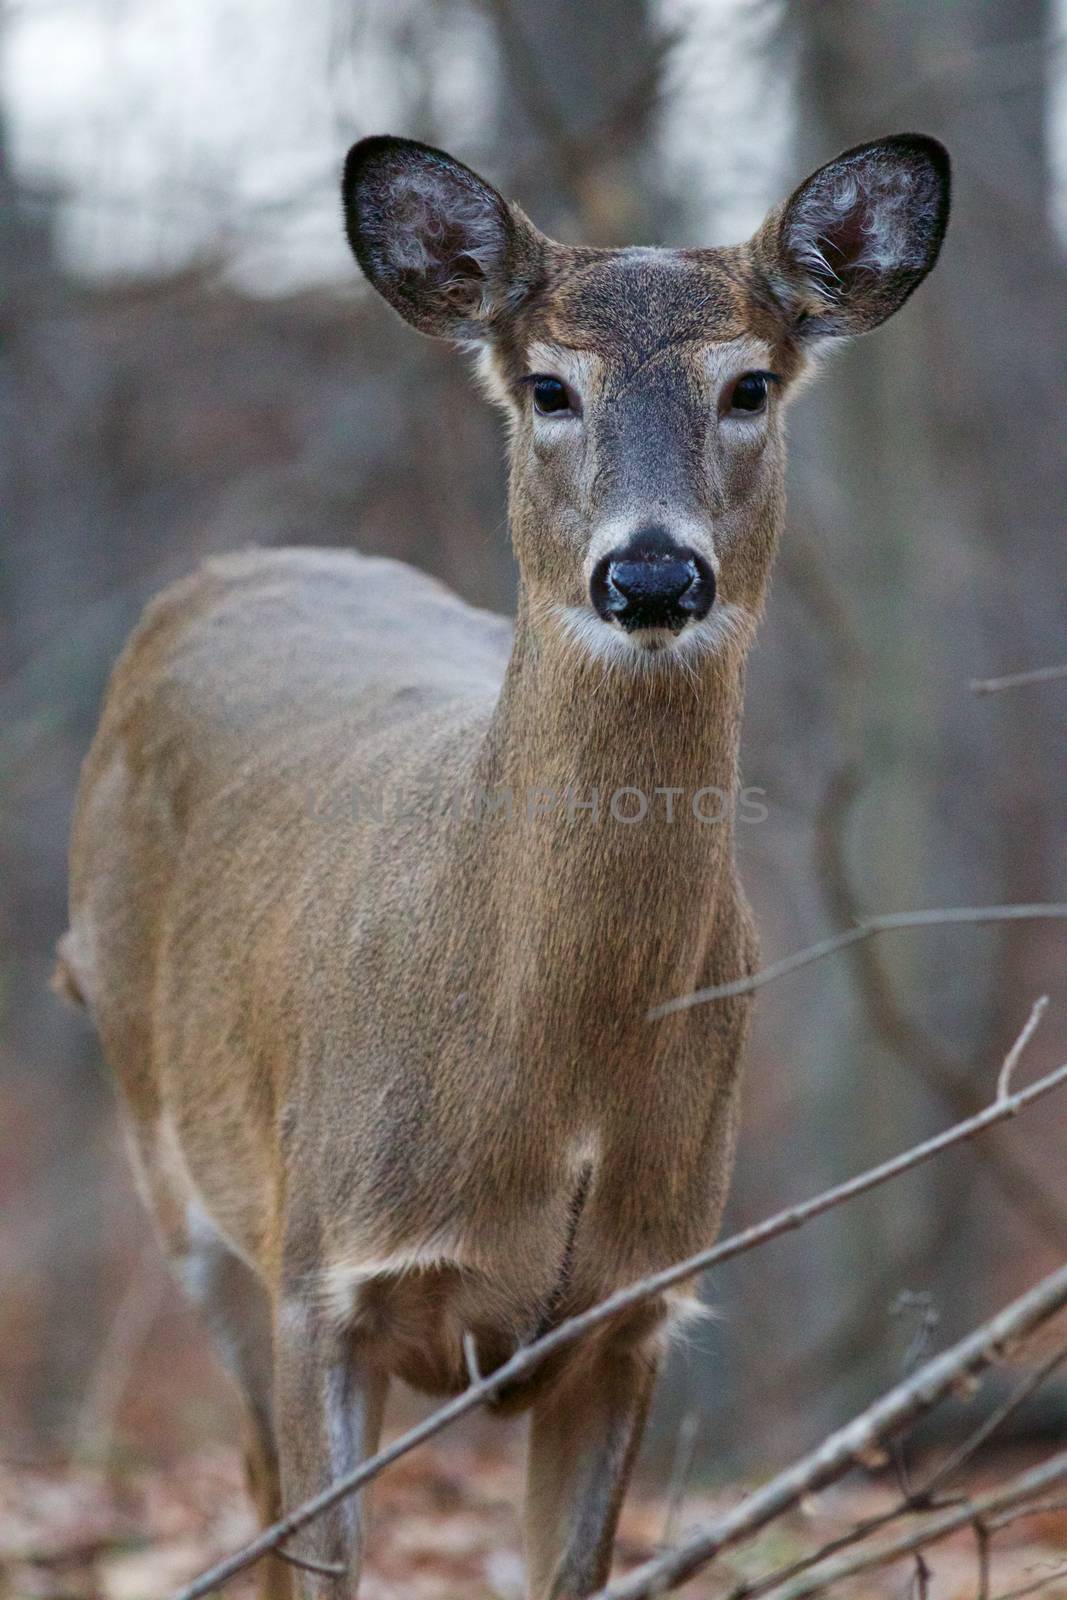 Photo of a young deer in the forest by teo